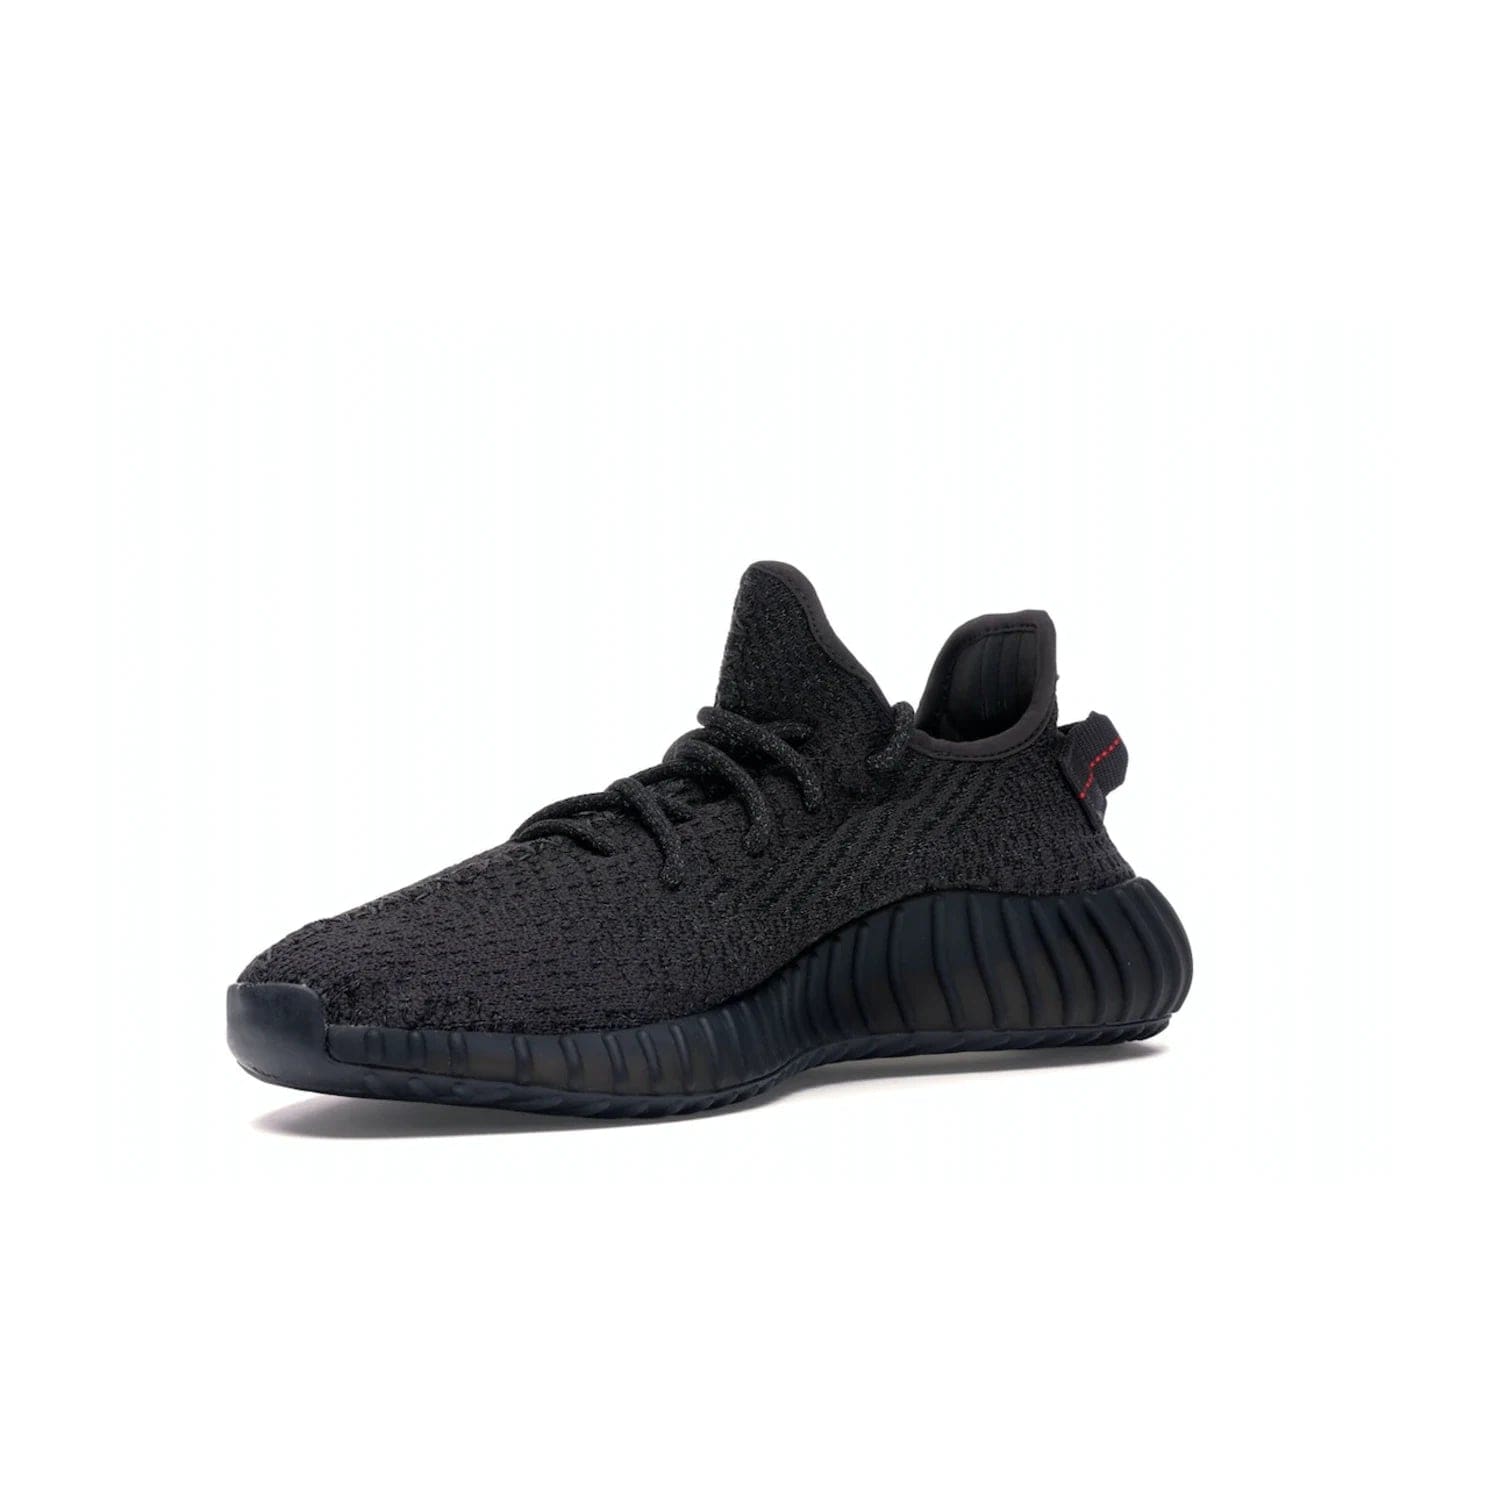 adidas Yeezy Boost 350 V2 Static Black (Reflective) - Image 15 - Only at www.BallersClubKickz.com - Make a statement with the adidas Yeezy Boost 350 V2 Static Black Reflective. All-black upper, reflective accents, midsole, and sole combine for a stylish look. High quality materials. June 2019 release. Add to your collection today.